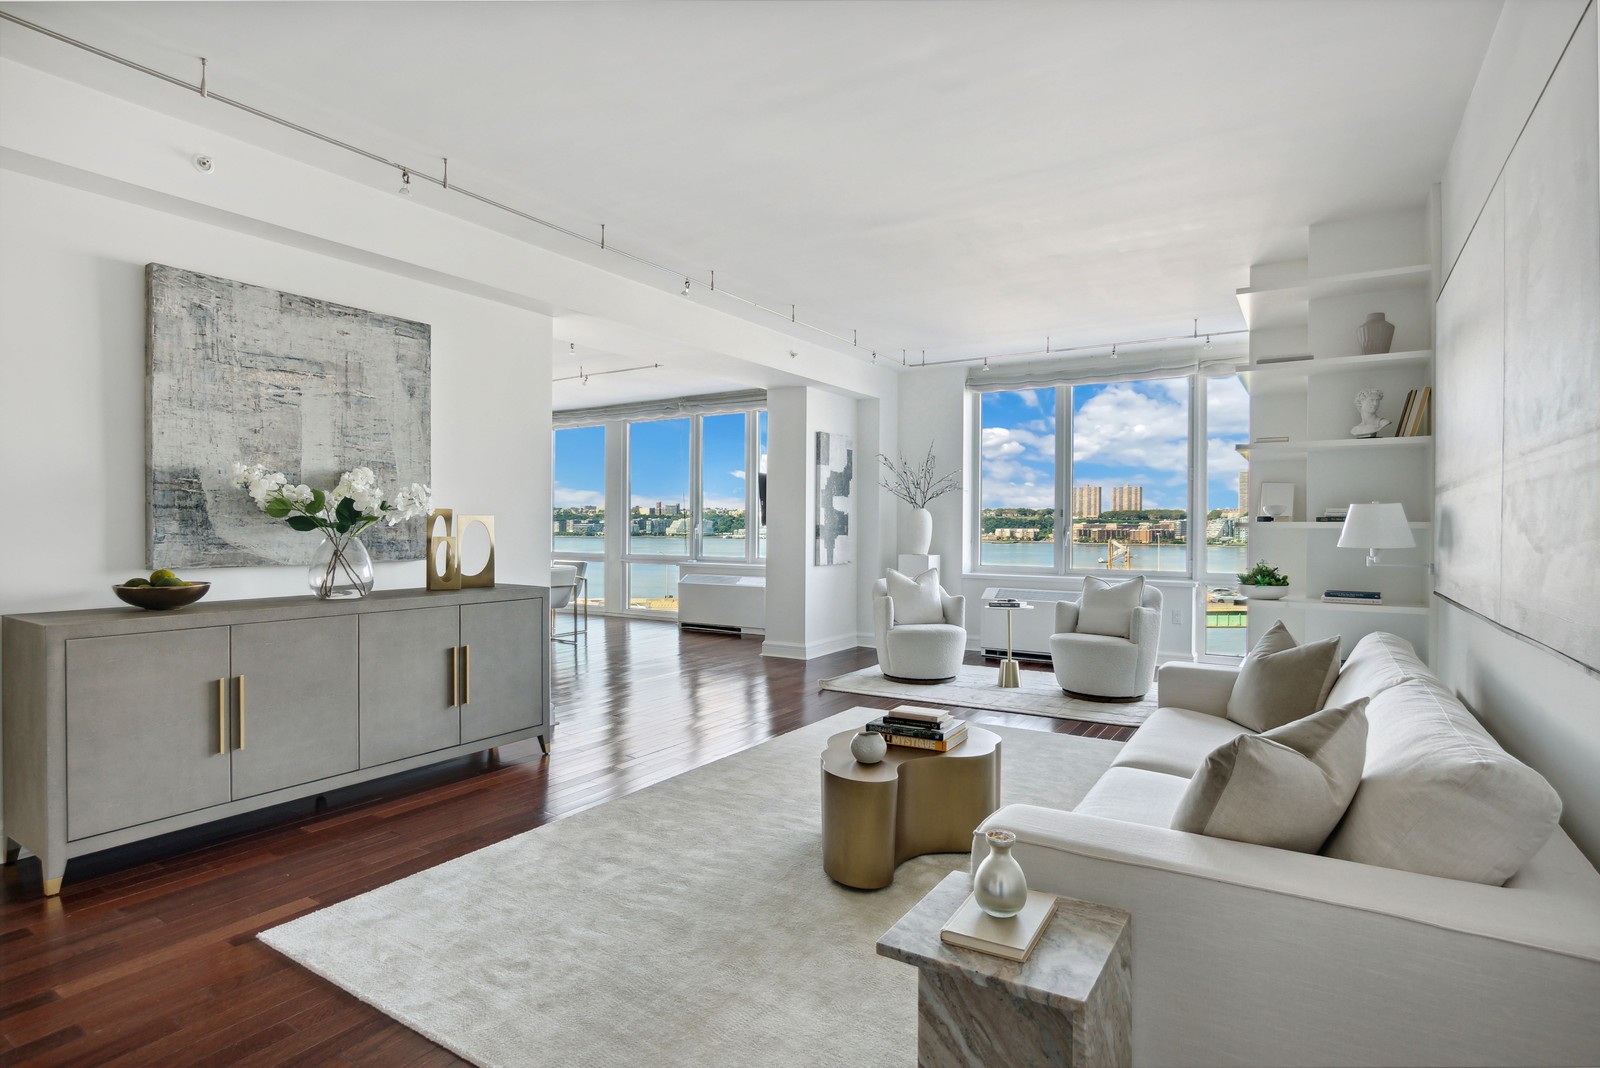 The gleaming, twin-towered Rushmore building at 80 Riverside Boulevard on the Upper West Side is the grand setting for this luxurious Manhattan home.